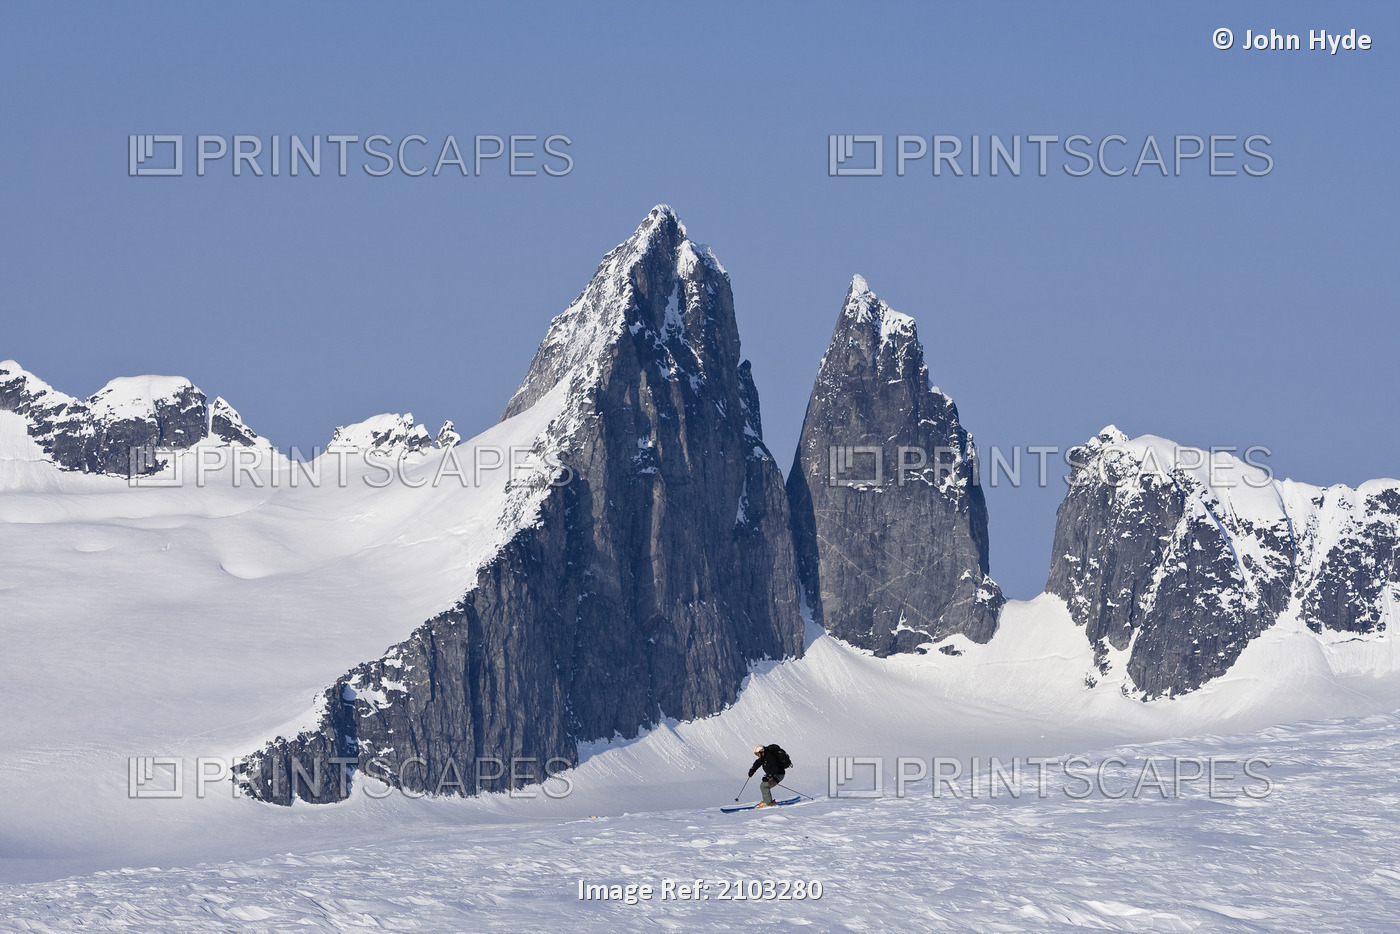 Alpine Skier Skiing On The Juneau Ice Field And Rhino Peak In The Background In ...